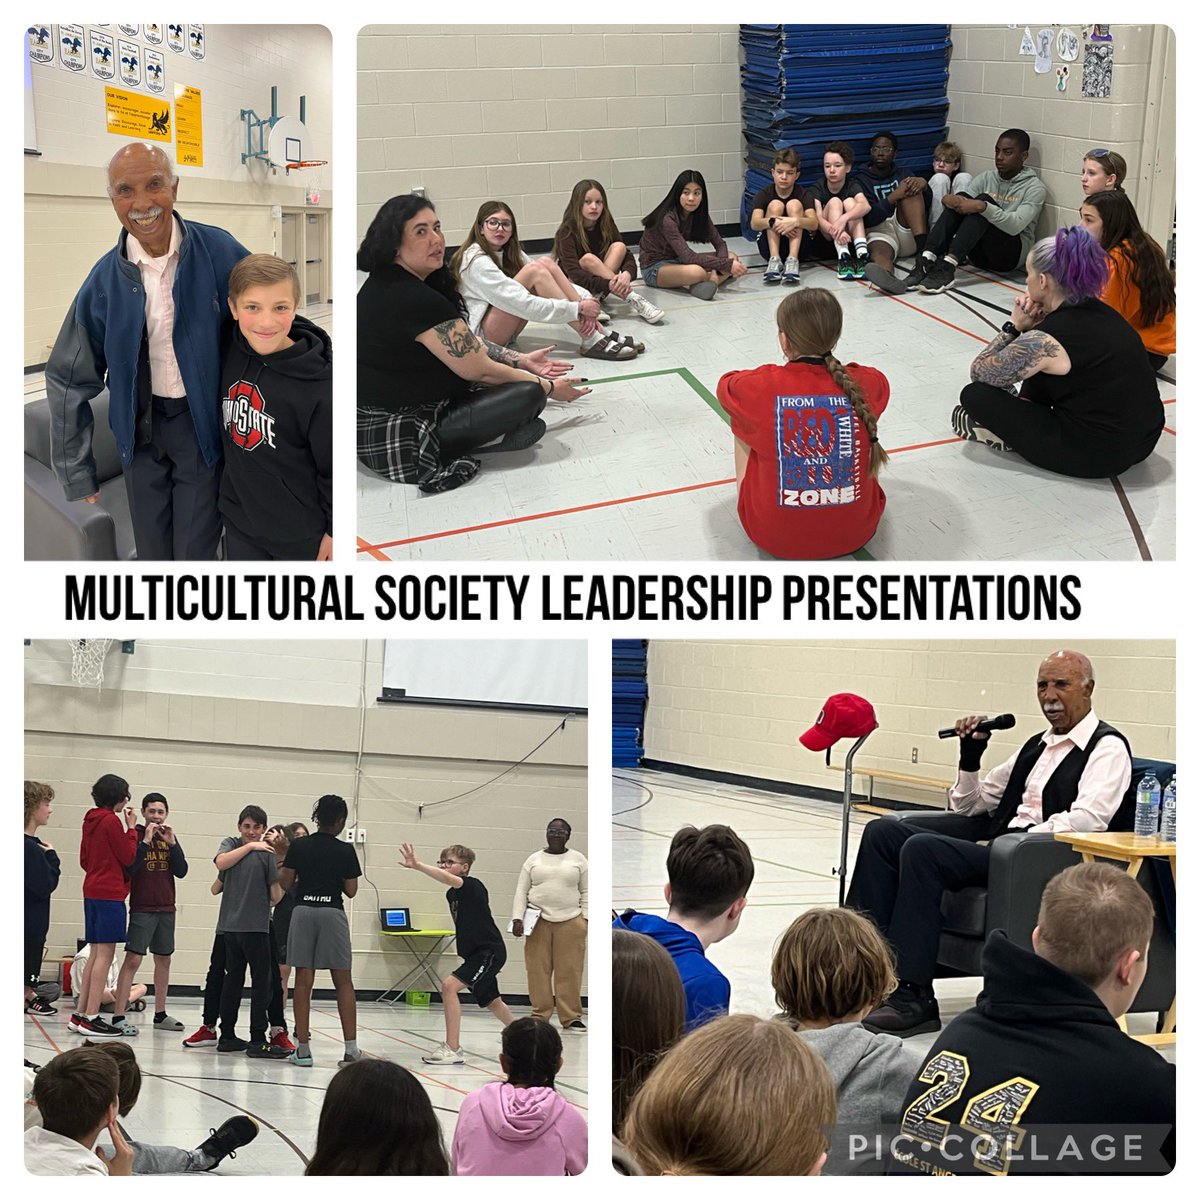 Awesome week of Leadership for our Griffon Family! Community🌎 Clean-Up, badminton practice & senior leadership workshops from Reverand Dixon & the Multicultural Society! We also celebrated our “Care-mangers” ❤️Mme Amber, Mme Cath & M Kebreab!